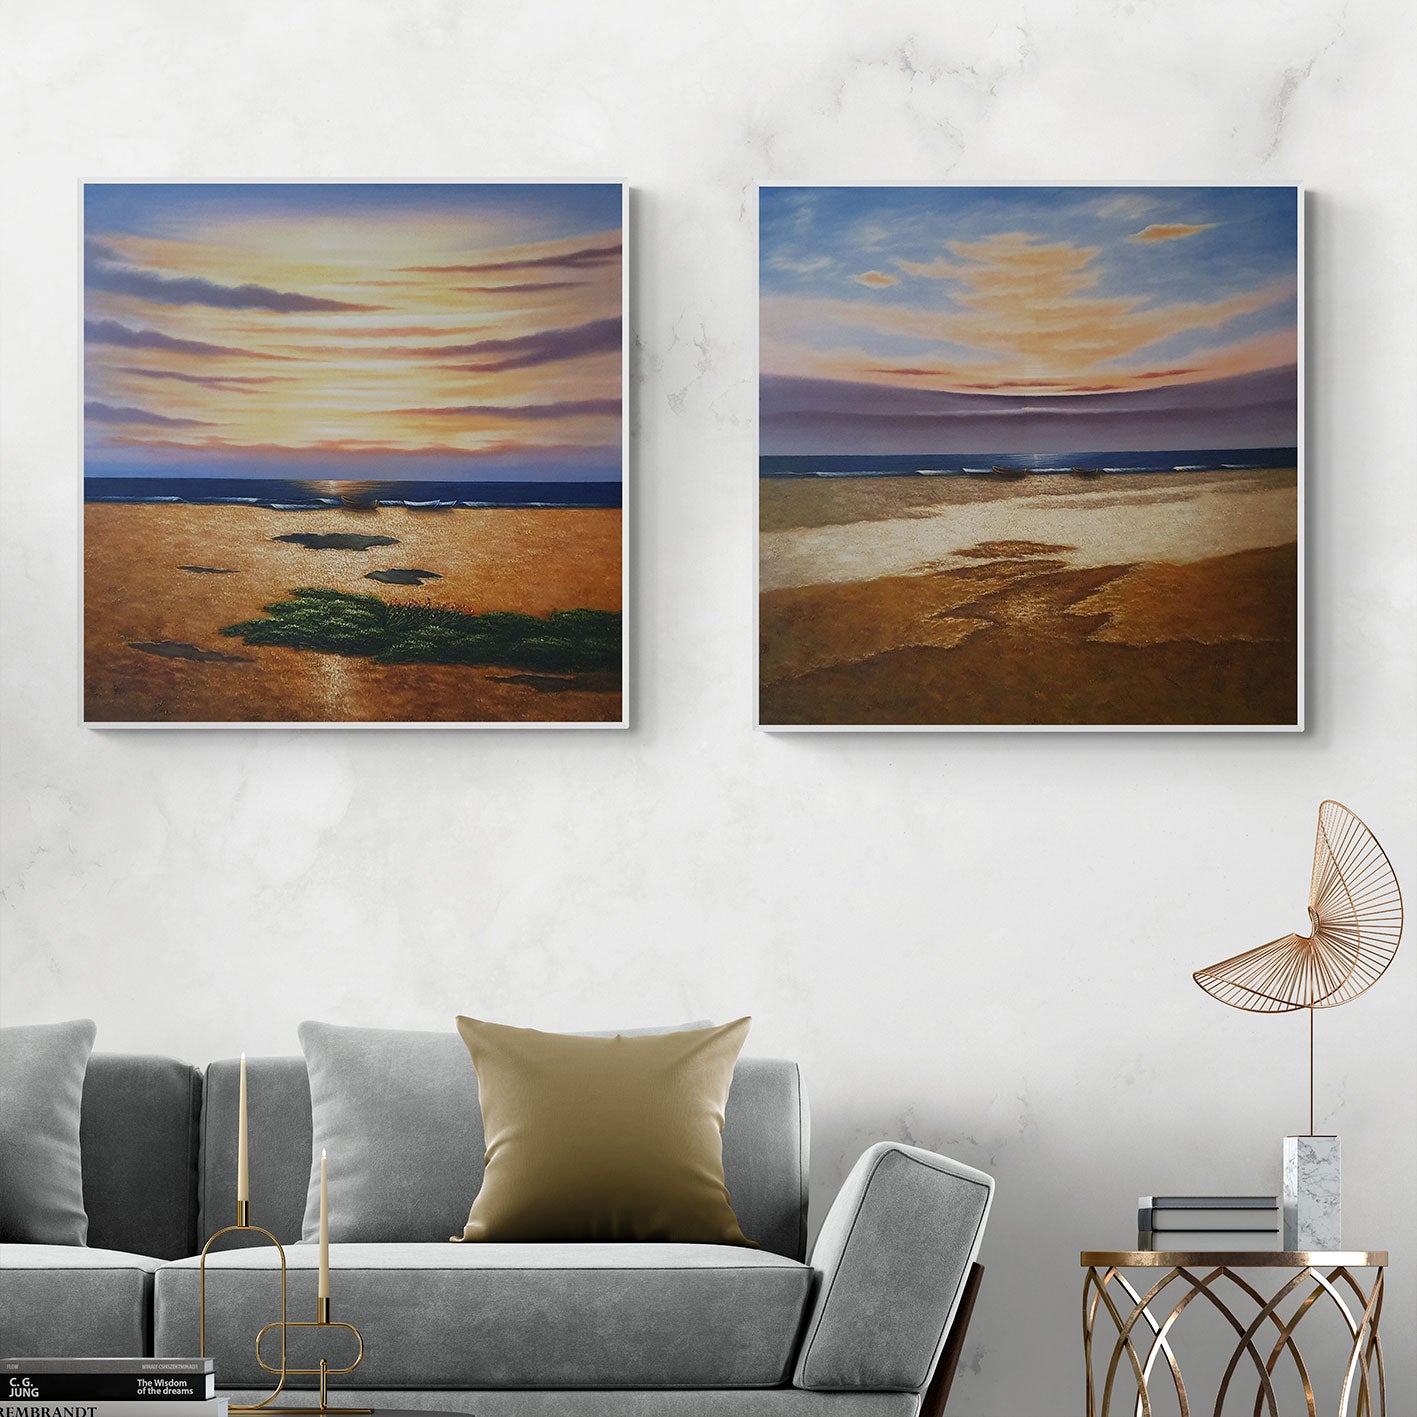 Marine Earth Diptych Painting 80x80 cm [2 pieces]